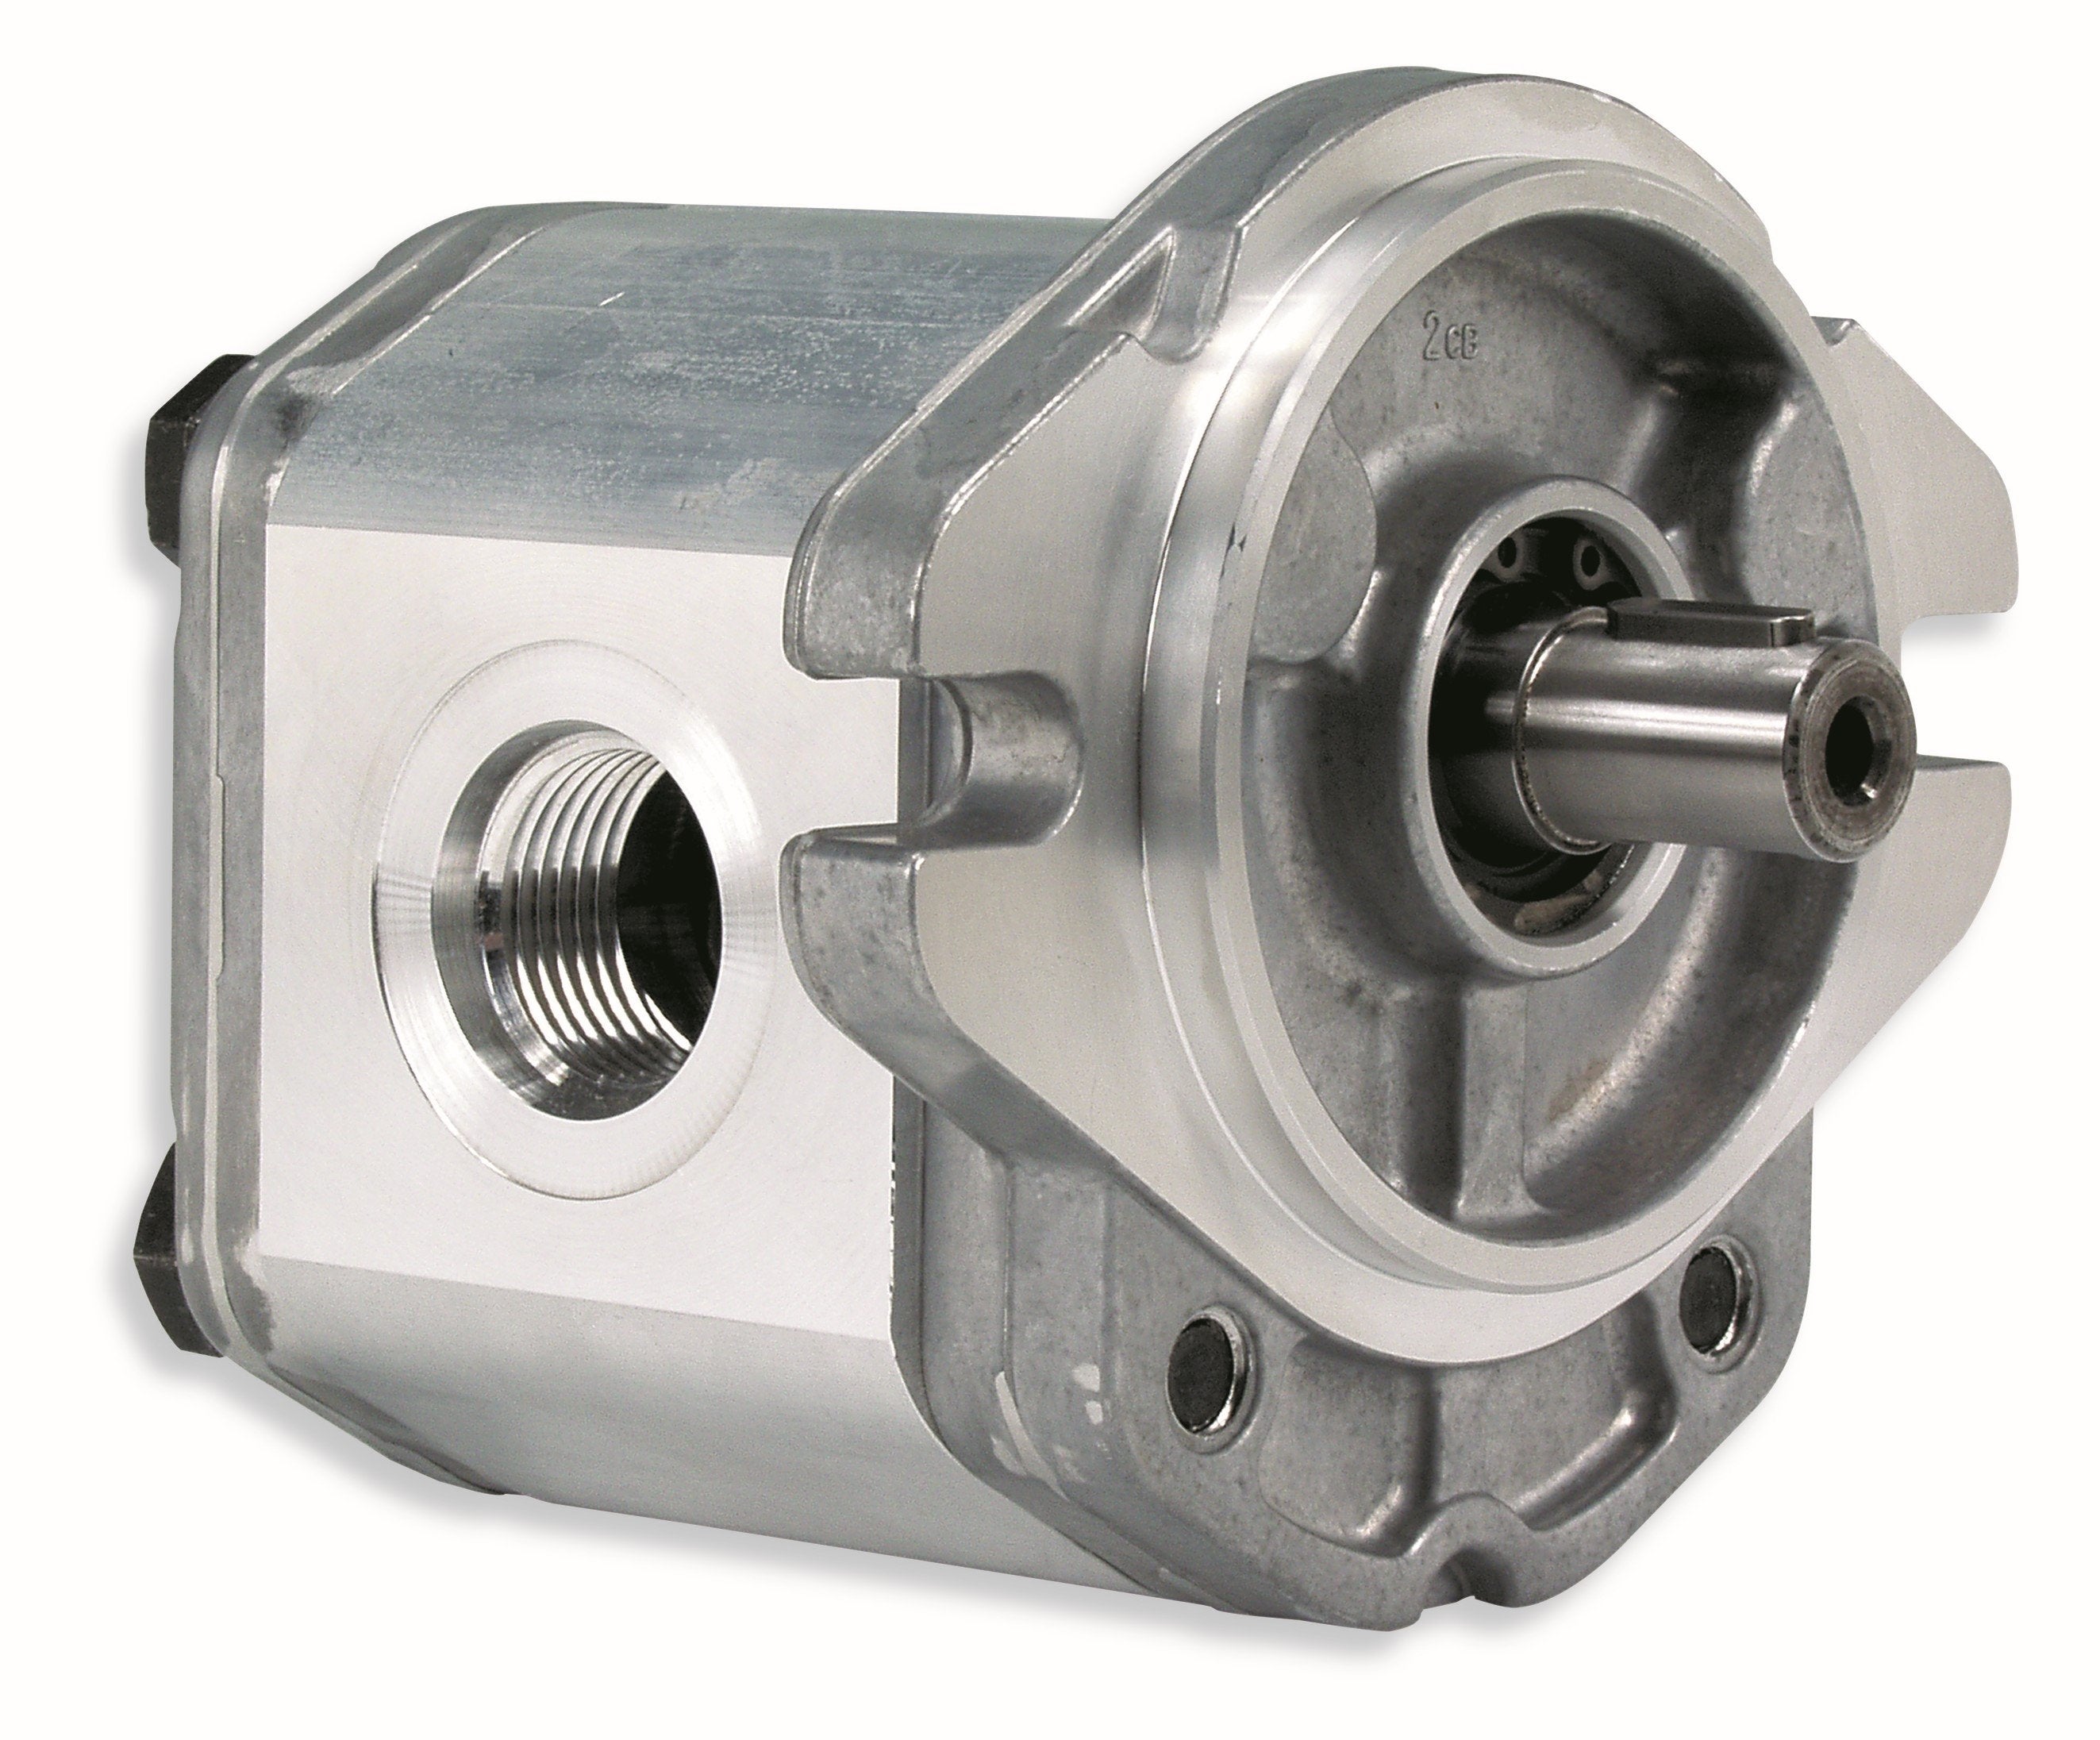 GHM2A-R-30-E2 : Marzocchi Gear Motor, Bidirectional, 21.1cc, 3335psi rated, 2200RPM, 0.75 (3/4") #12 SAE ports, 5/8" Bore x 5/32" Keyed Shaft